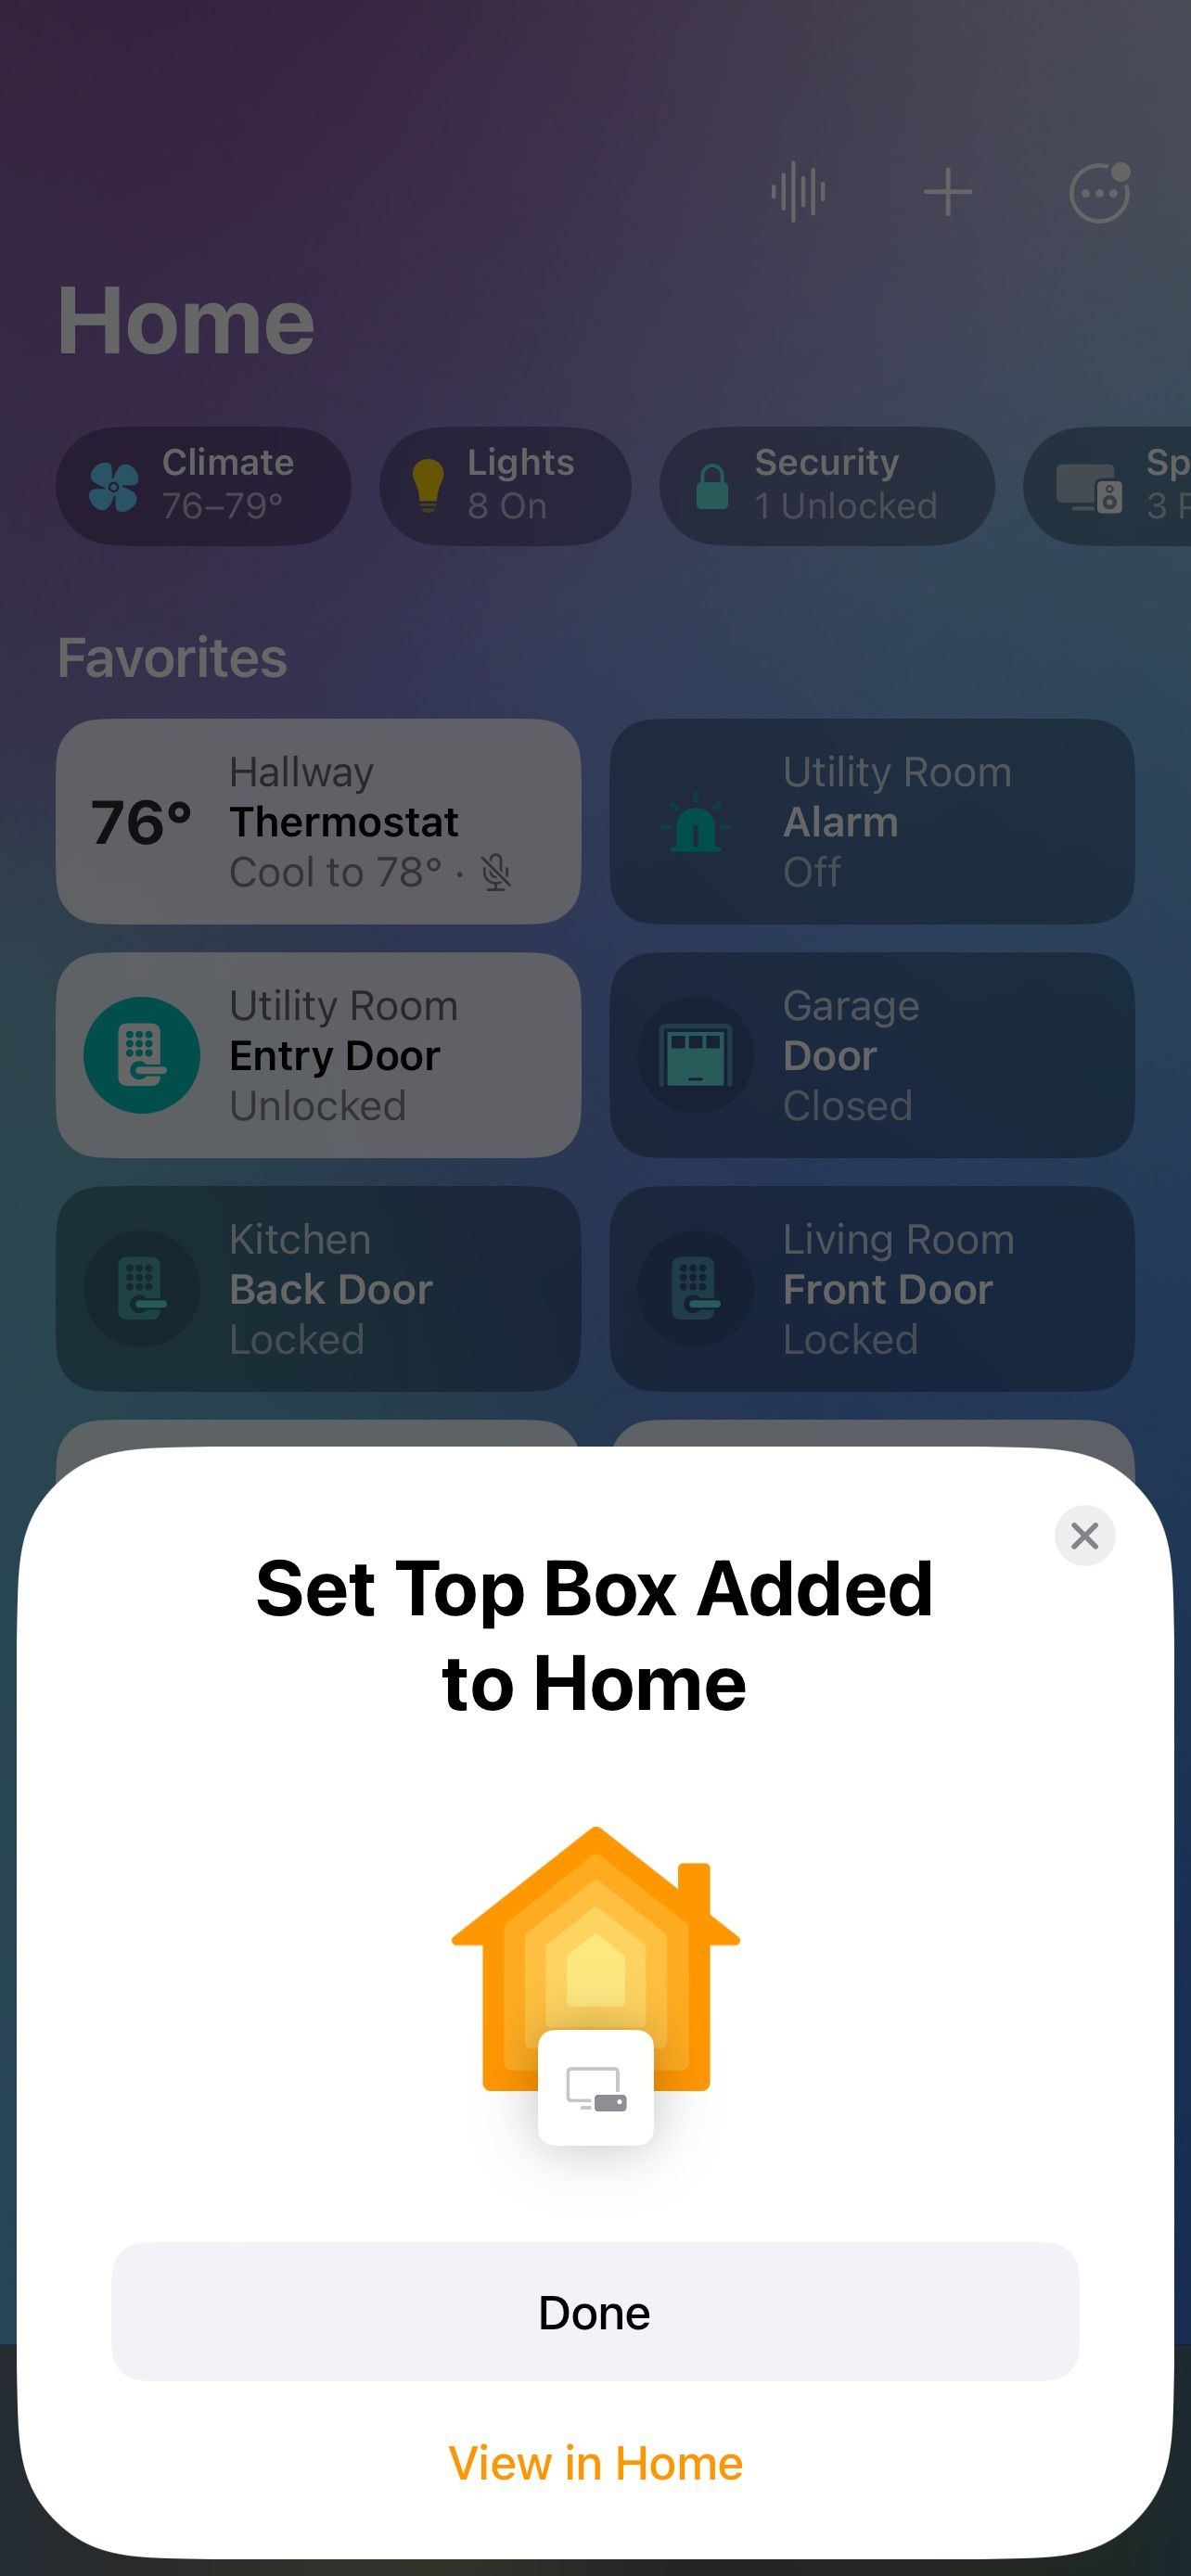 Home App iOS 16 Add Set Top Box Complete